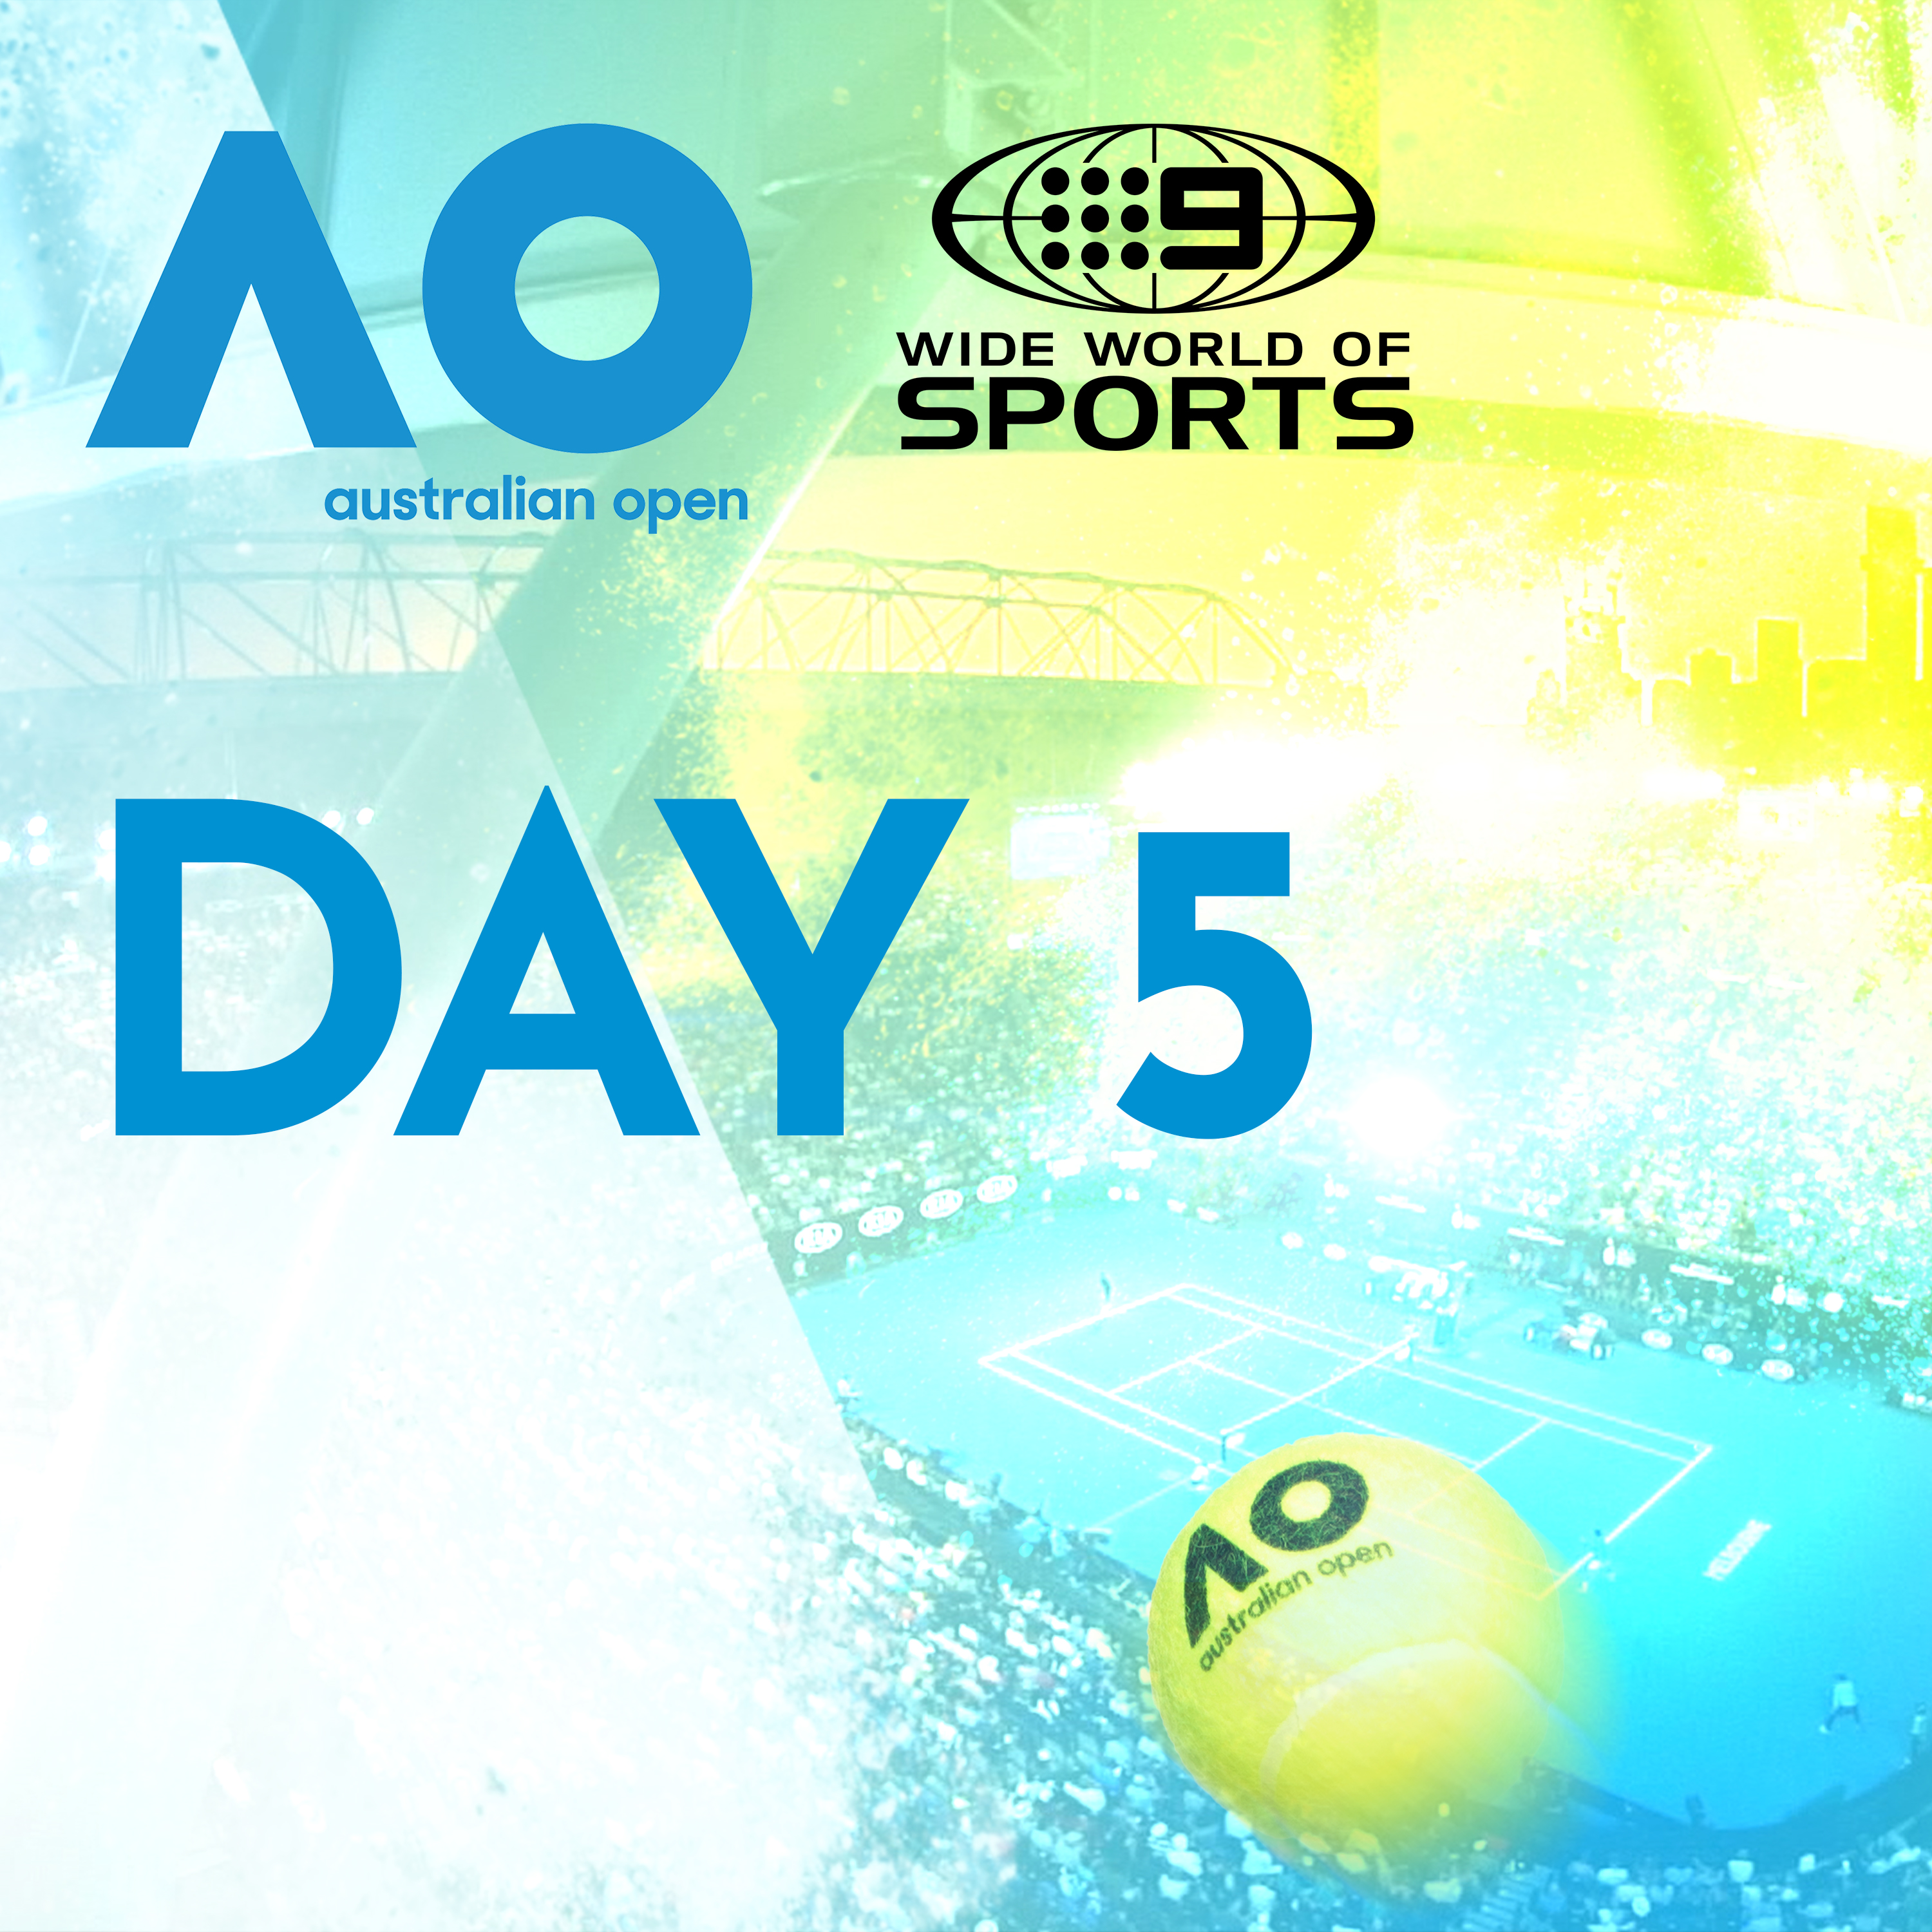 DAY 5 - 3rd Latest finish in Tennis History and Novak kicks out fan